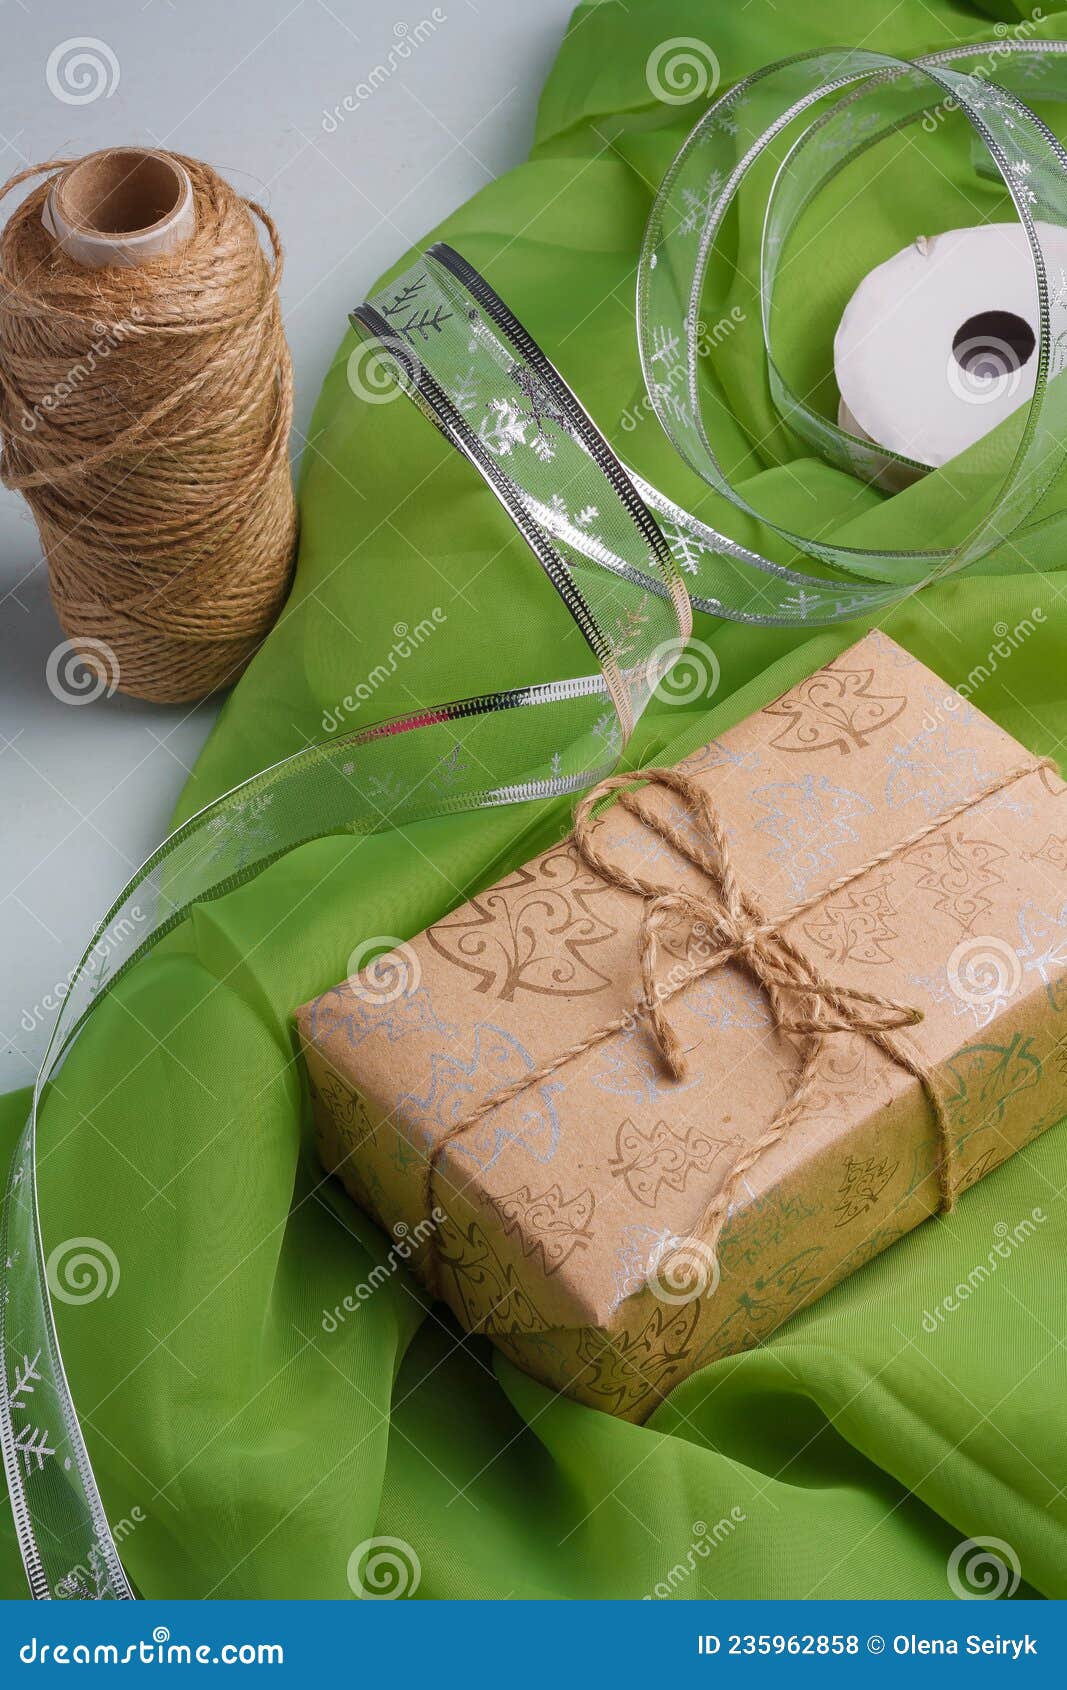 Eco gift box in craft paper branch on linen fabric. Zero waste